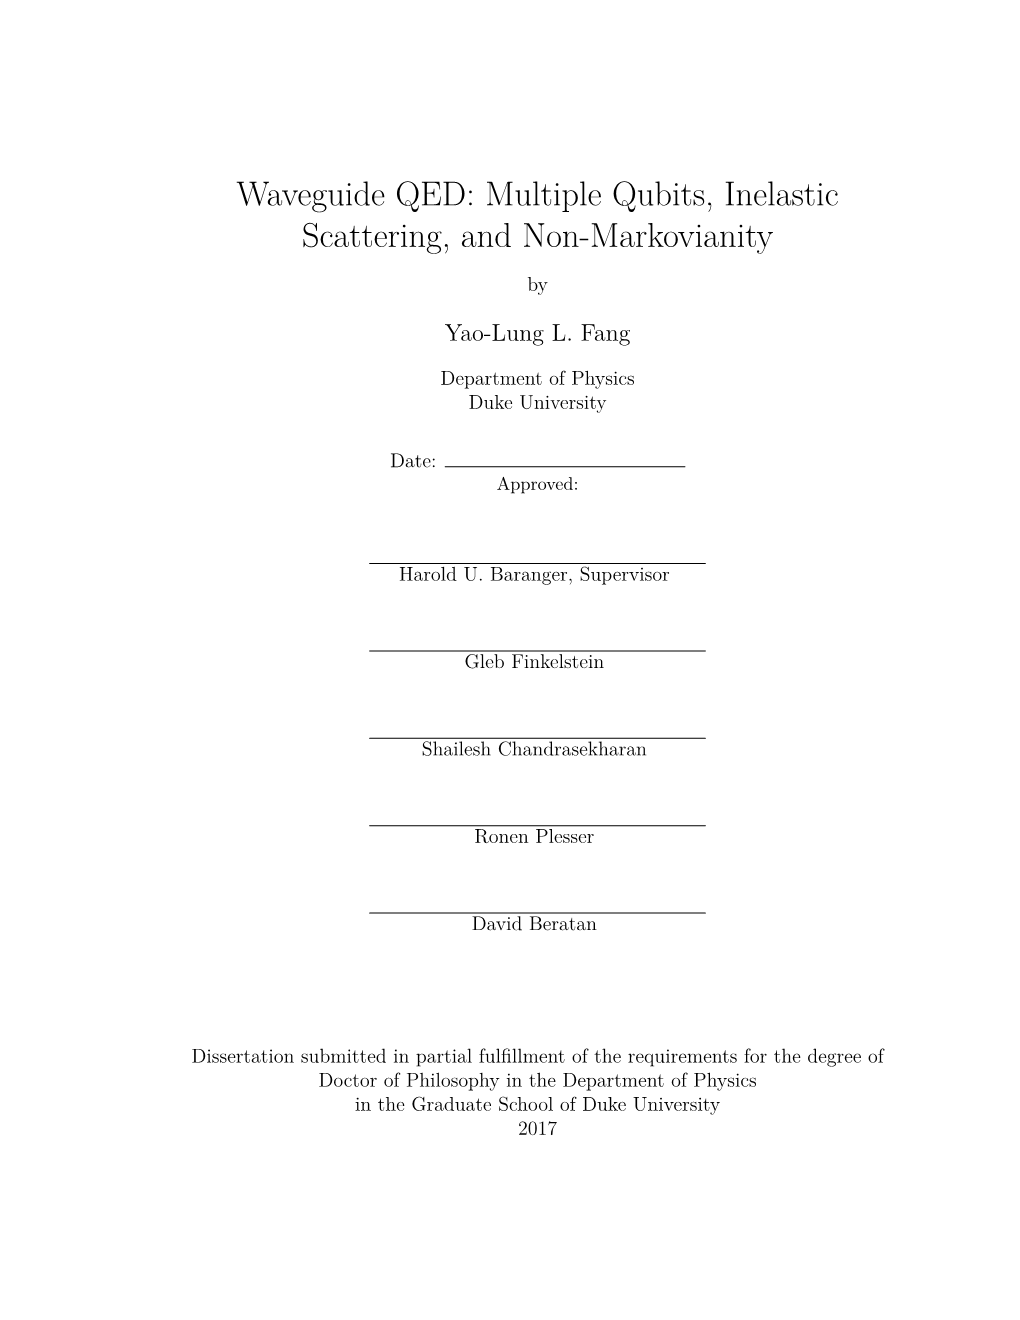 Waveguide QED: Multiple Qubits, Inelastic Scattering, and Non-Markovianity